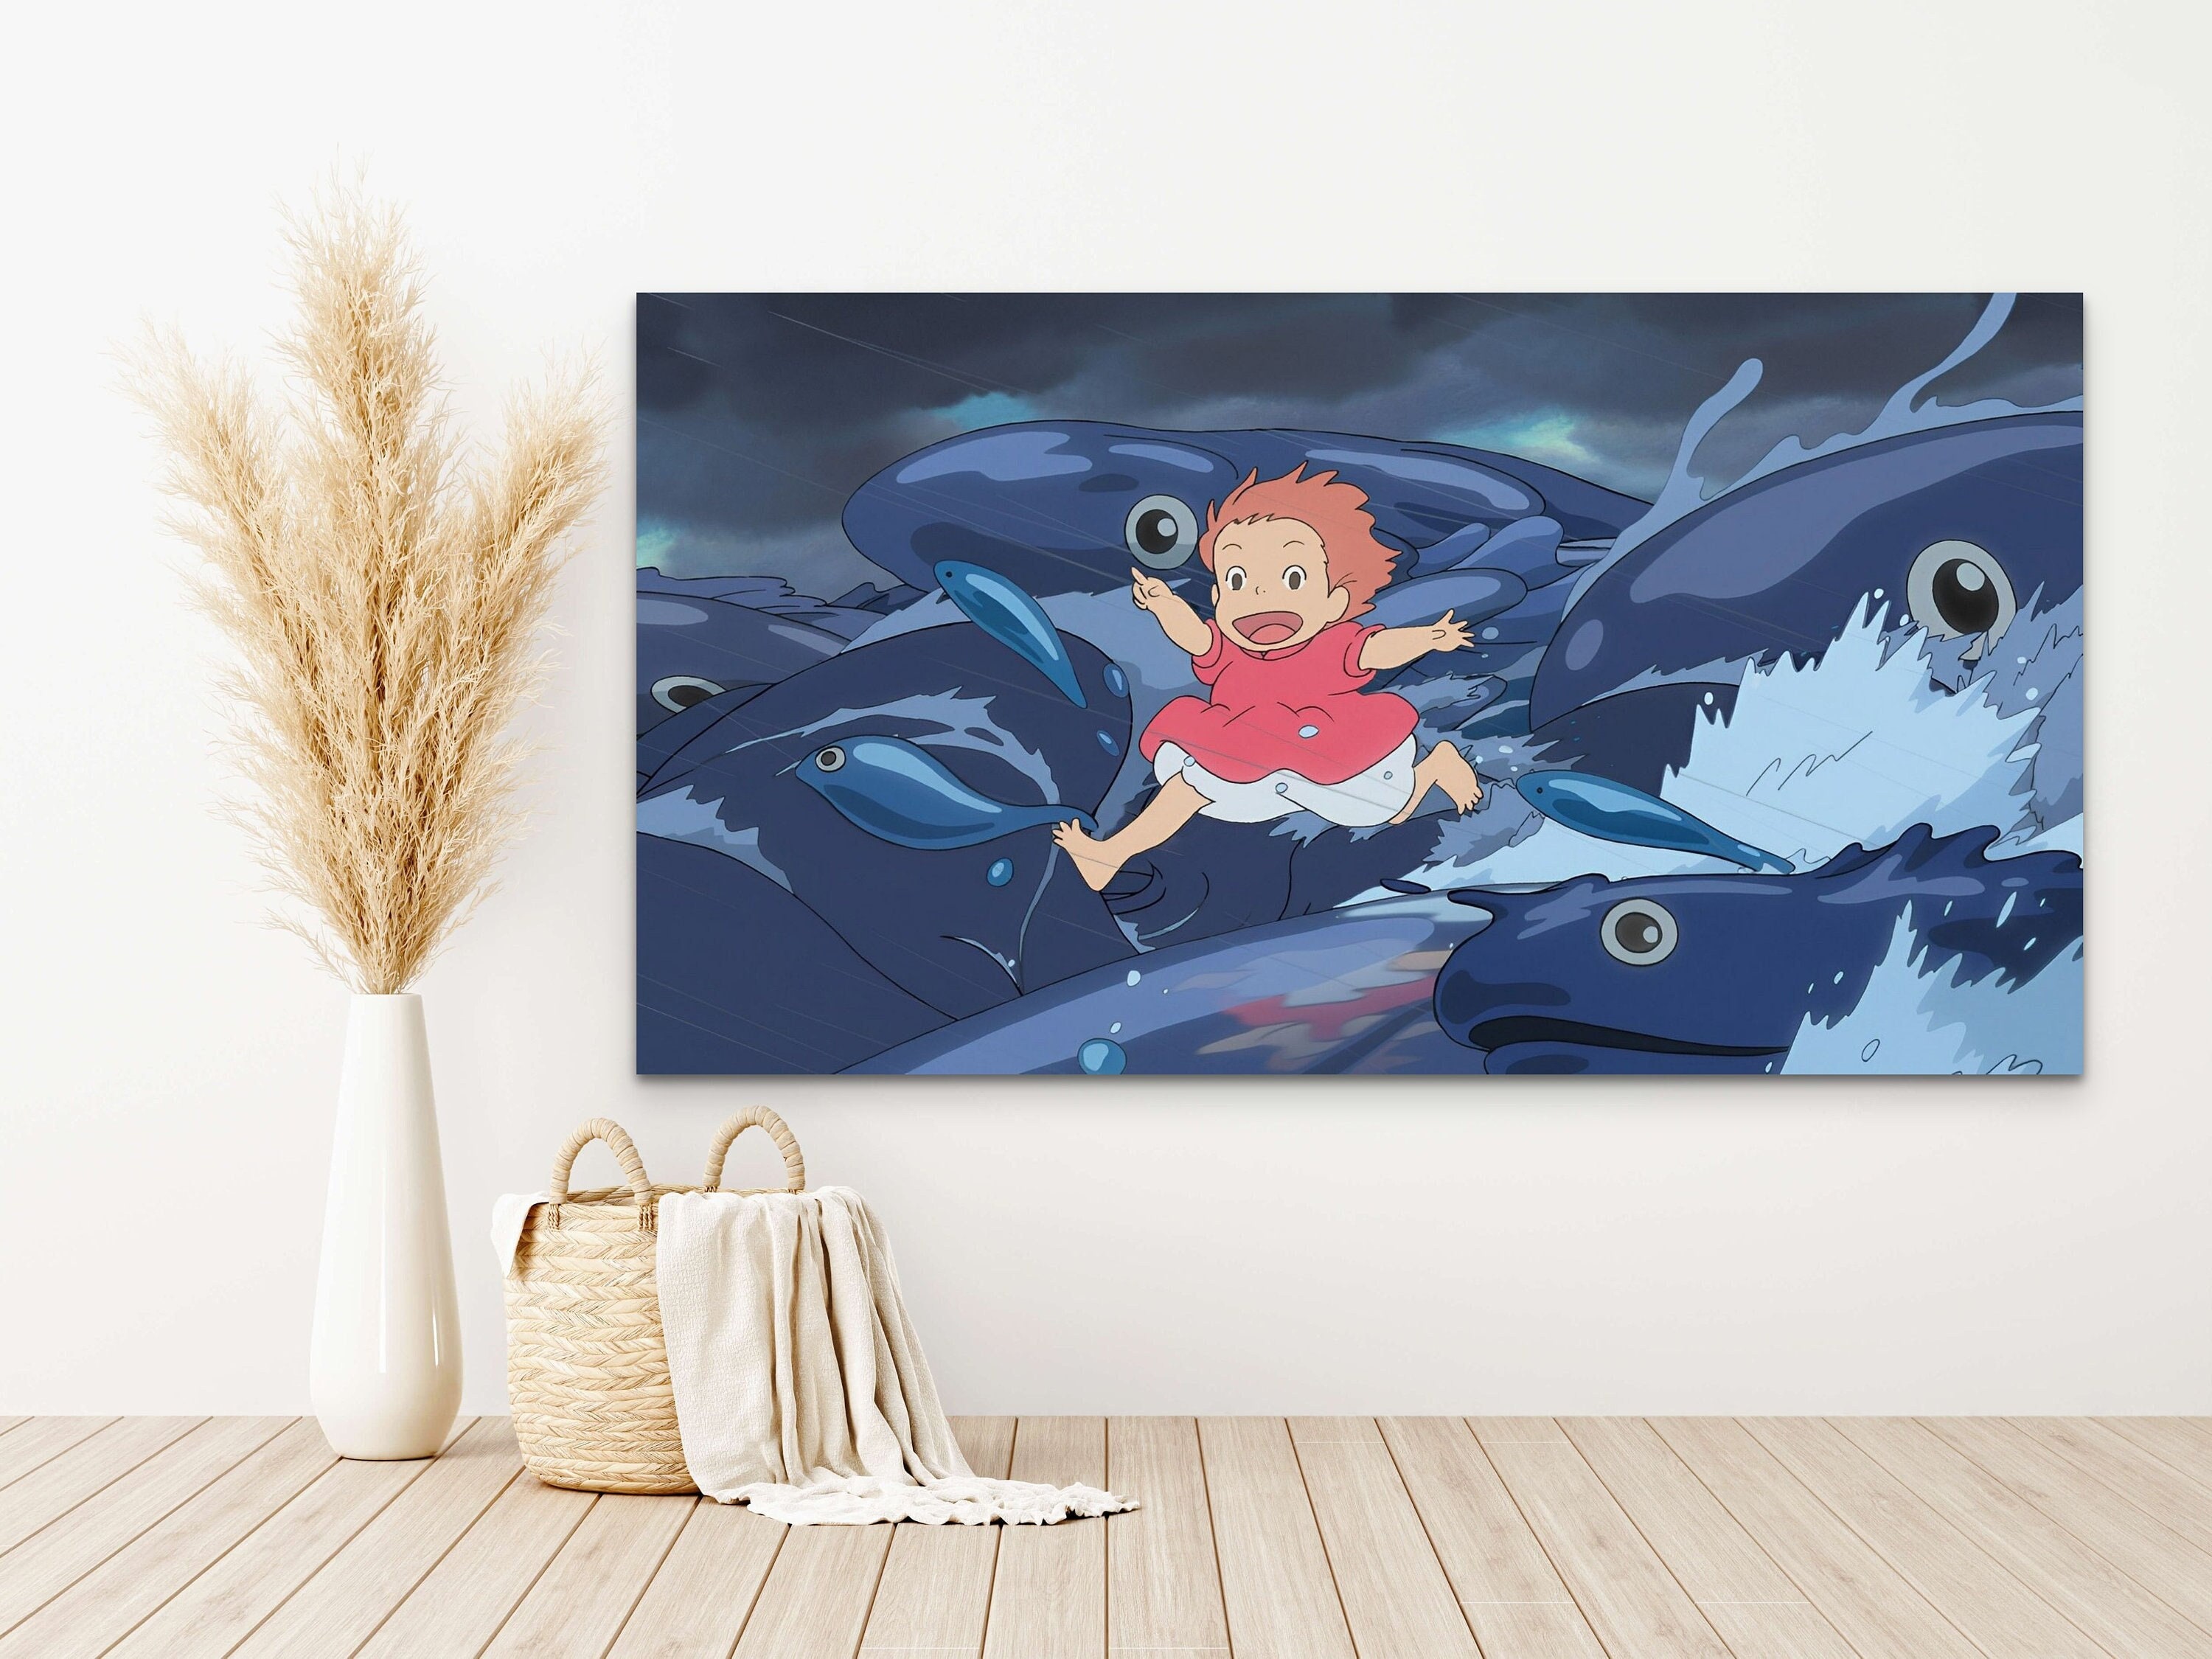 Inspirational Wall Art Co. - Howl's Moving Castle Poster Studio Ghibli Art  Print - Anime Movie Posters for Fans - Unframed (11x17 Inches)